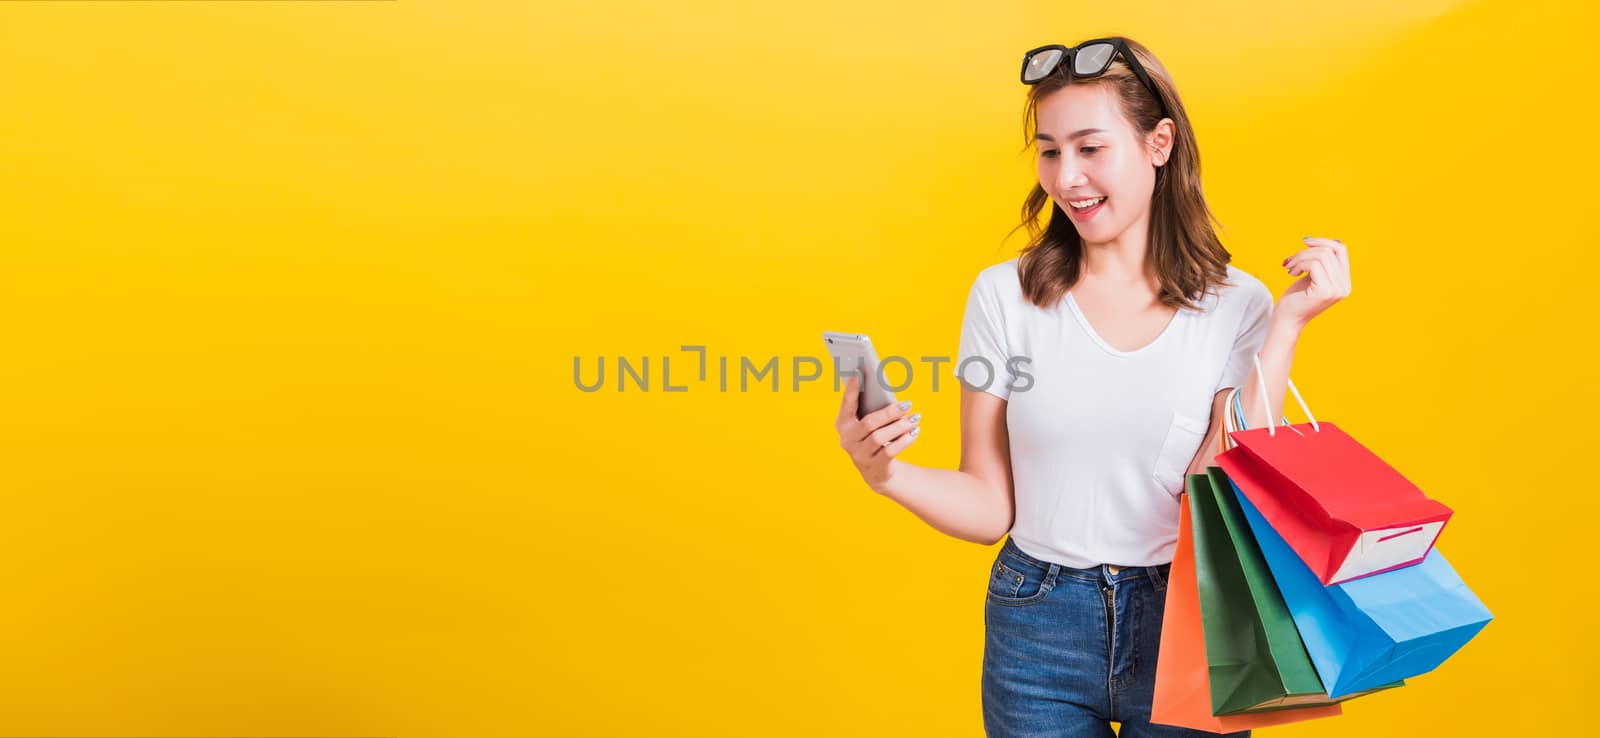 woman smile, She holding shopping bags and using a mobile phone by Sorapop